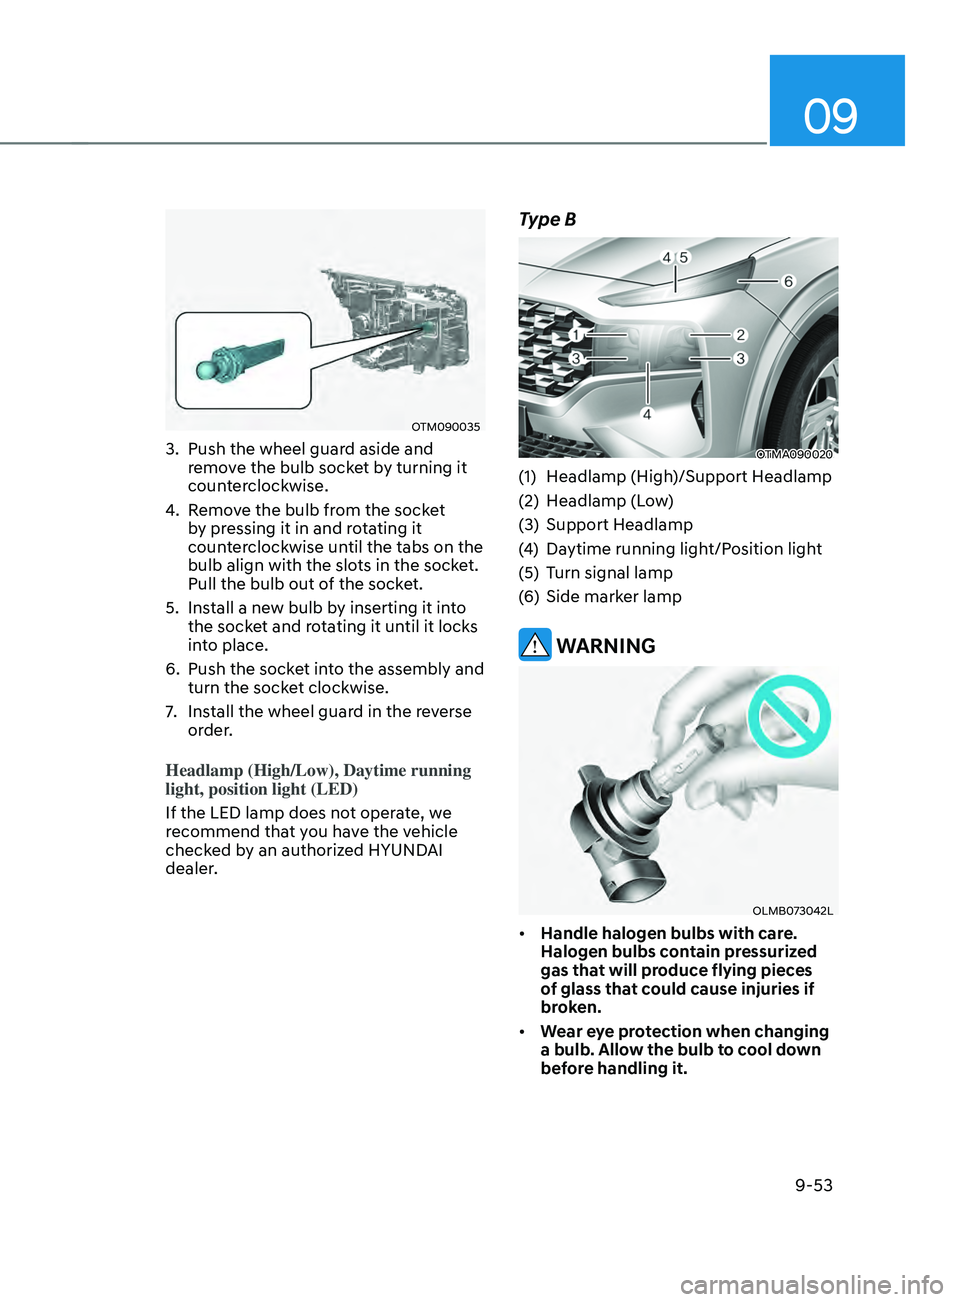 HYUNDAI SANTA FE 2021  Owners Manual 09
9-53
OTM090035
3. Push the wheel guard aside and 
remove the bulb socket by turning it 
counterclockwise.
4.
 Remo

ve the bulb from the socket 
by pressing it in and rotating it 
counterclockwise 